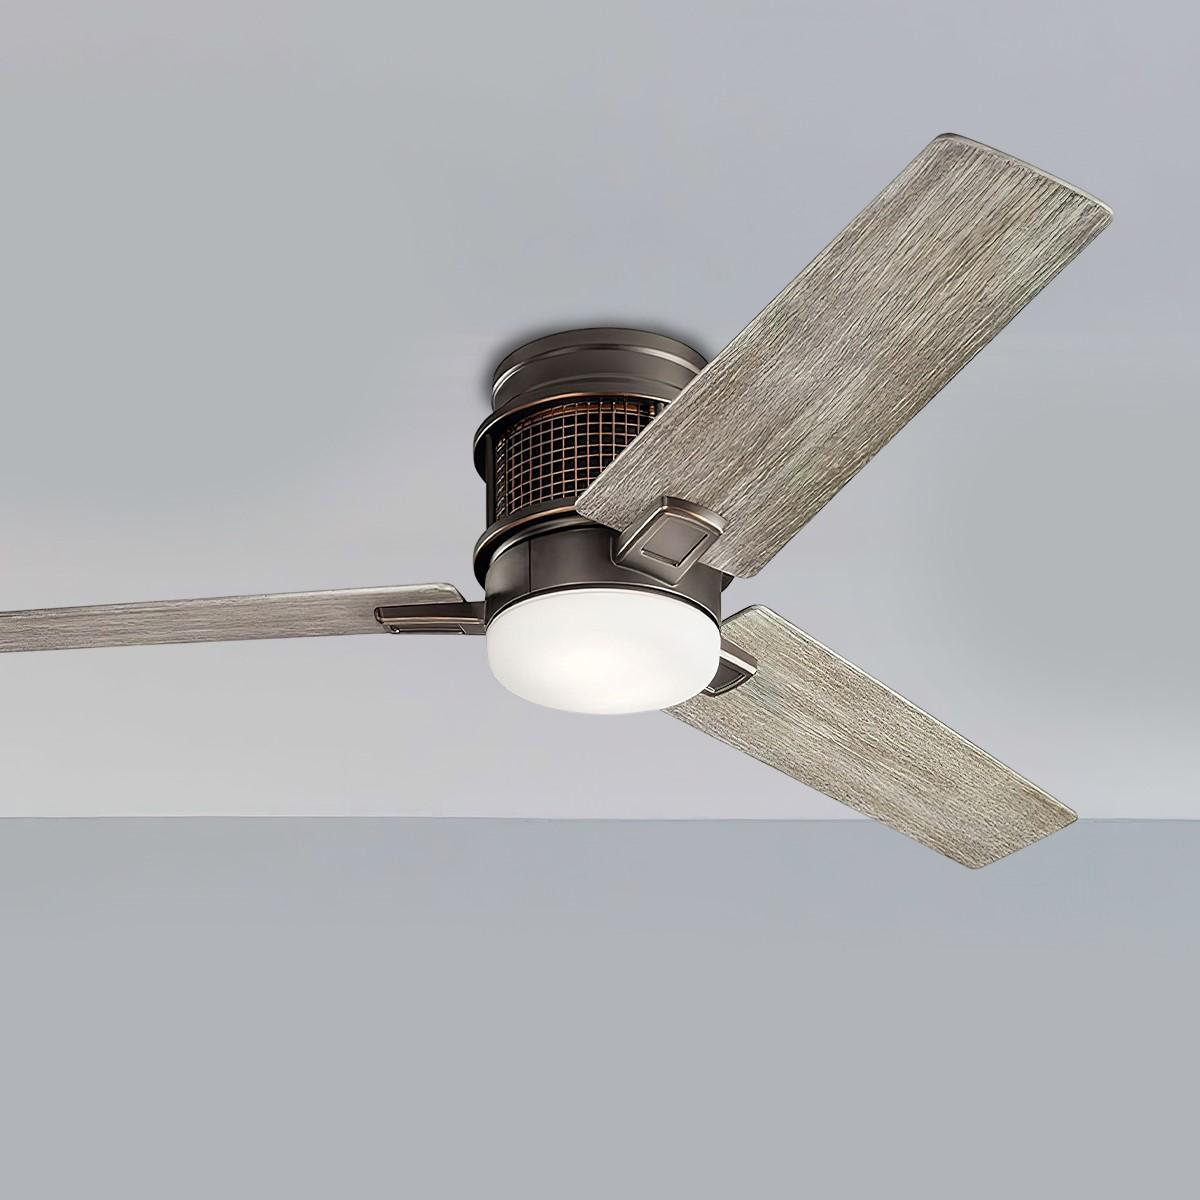 Chiara 52 Inch Rustic Caged Ceiling Fan With Light, Wall Control Included